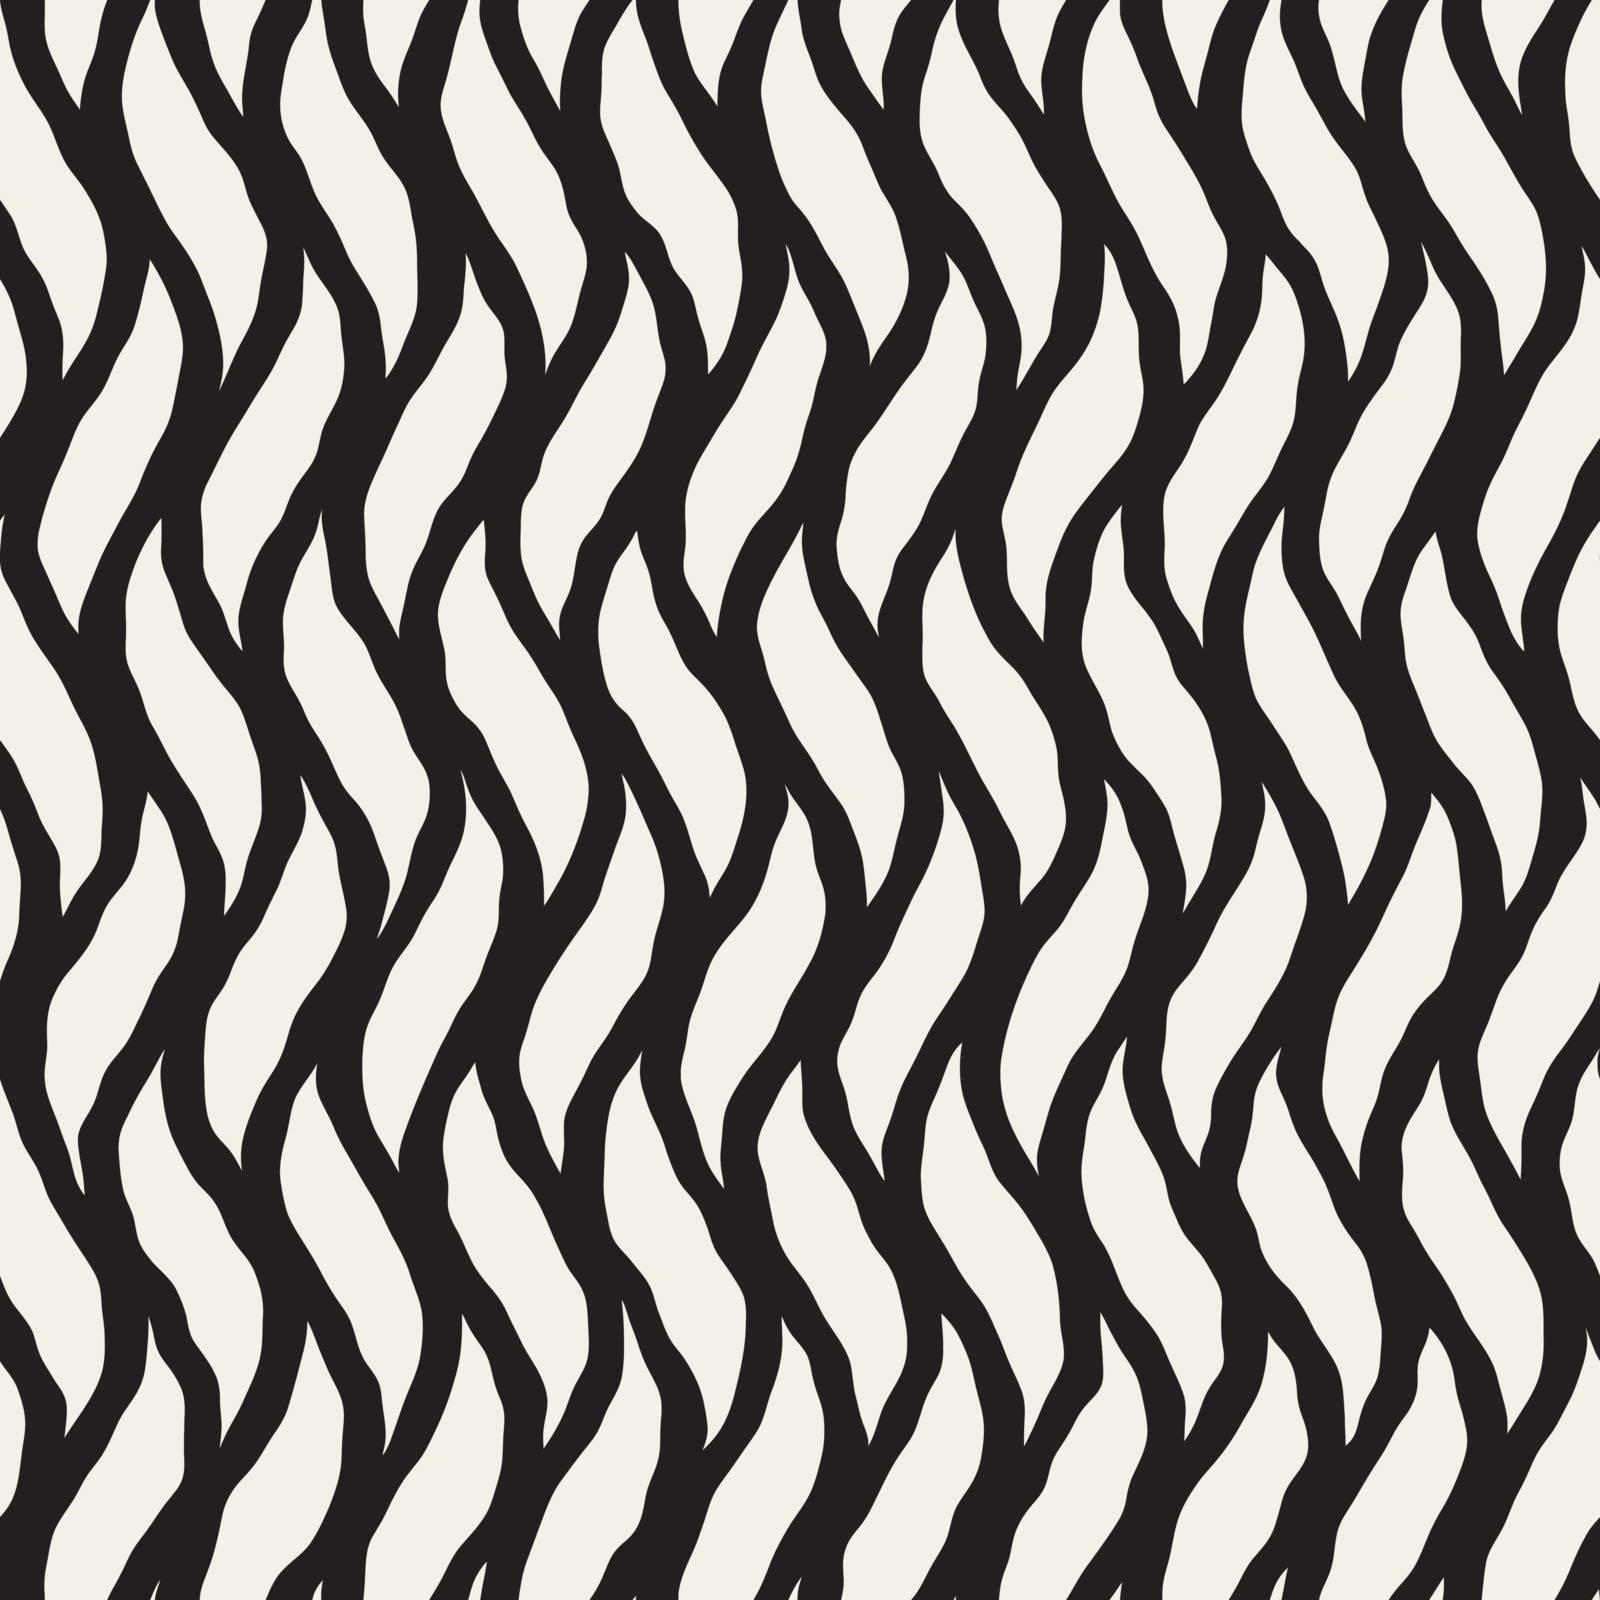 Vector Seamless Black And White Hand Drawn Vertical Wavy Lines Pattern. Abstract Freehand Background Design